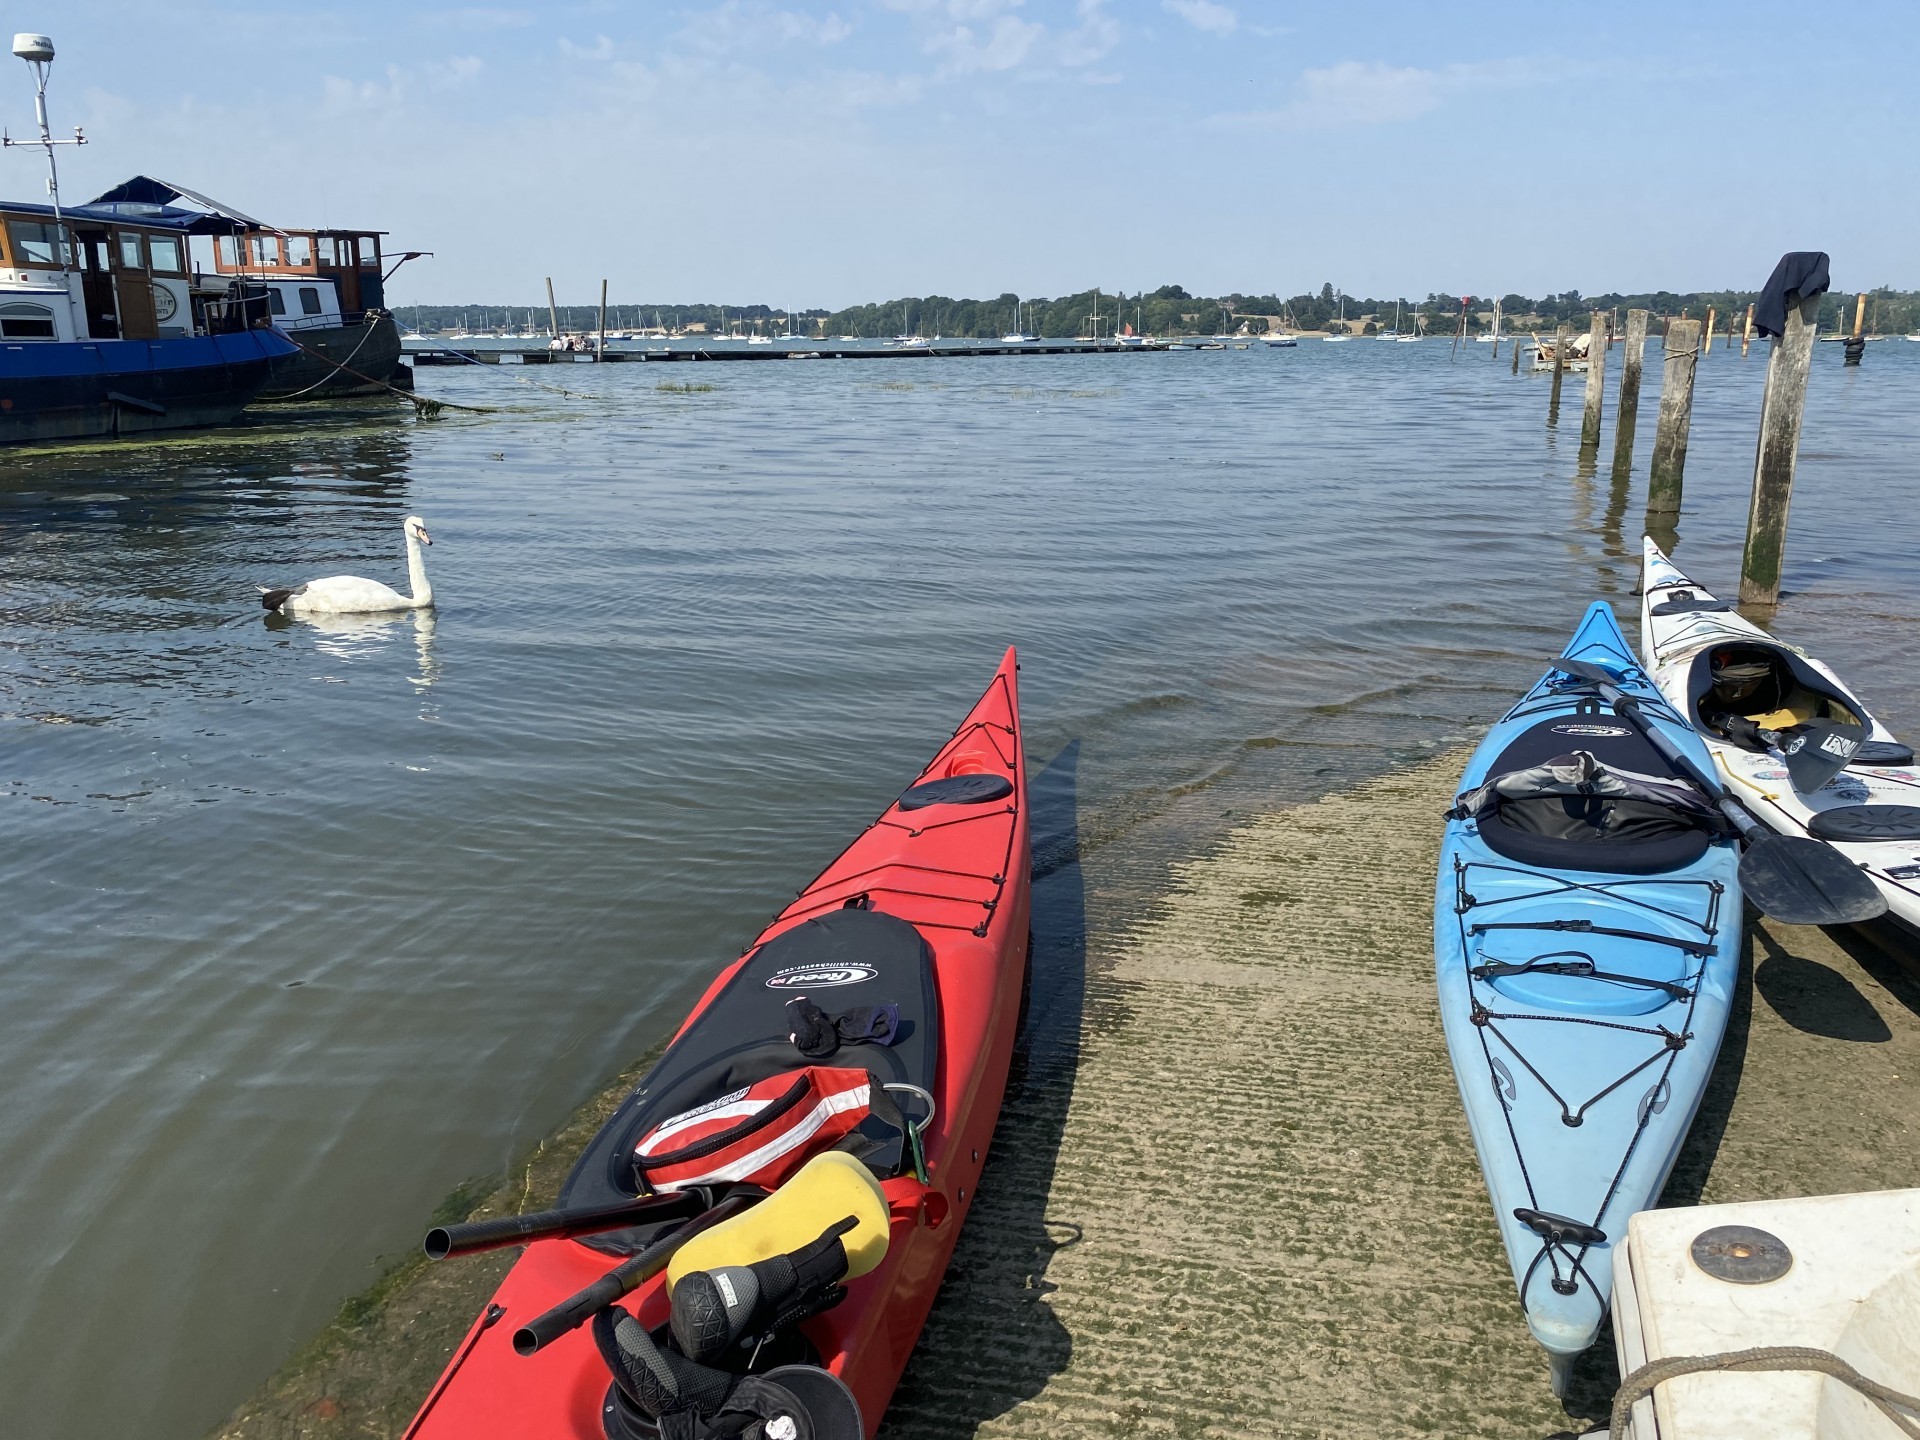 Sea kayaks on the slip with a swan in the background at Pin Mill on the Discover Kayaking trip